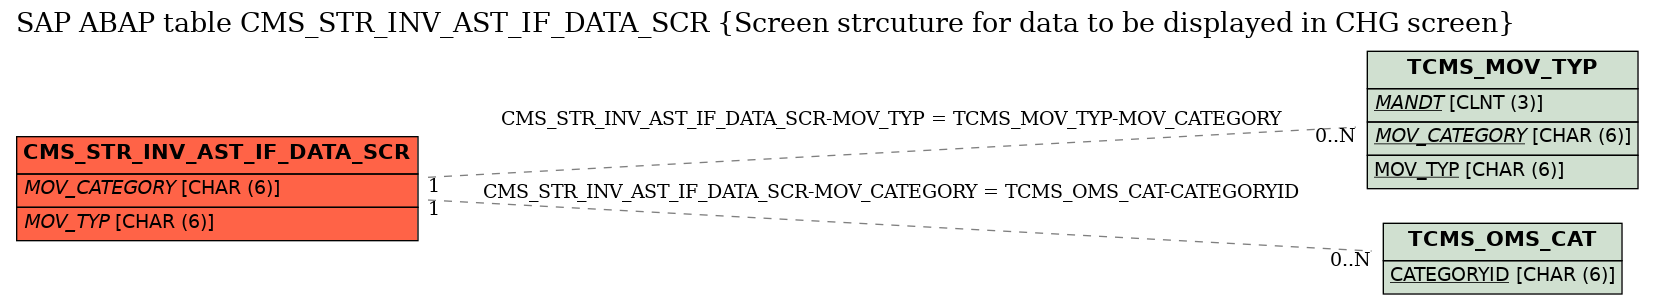 E-R Diagram for table CMS_STR_INV_AST_IF_DATA_SCR (Screen strcuture for data to be displayed in CHG screen)